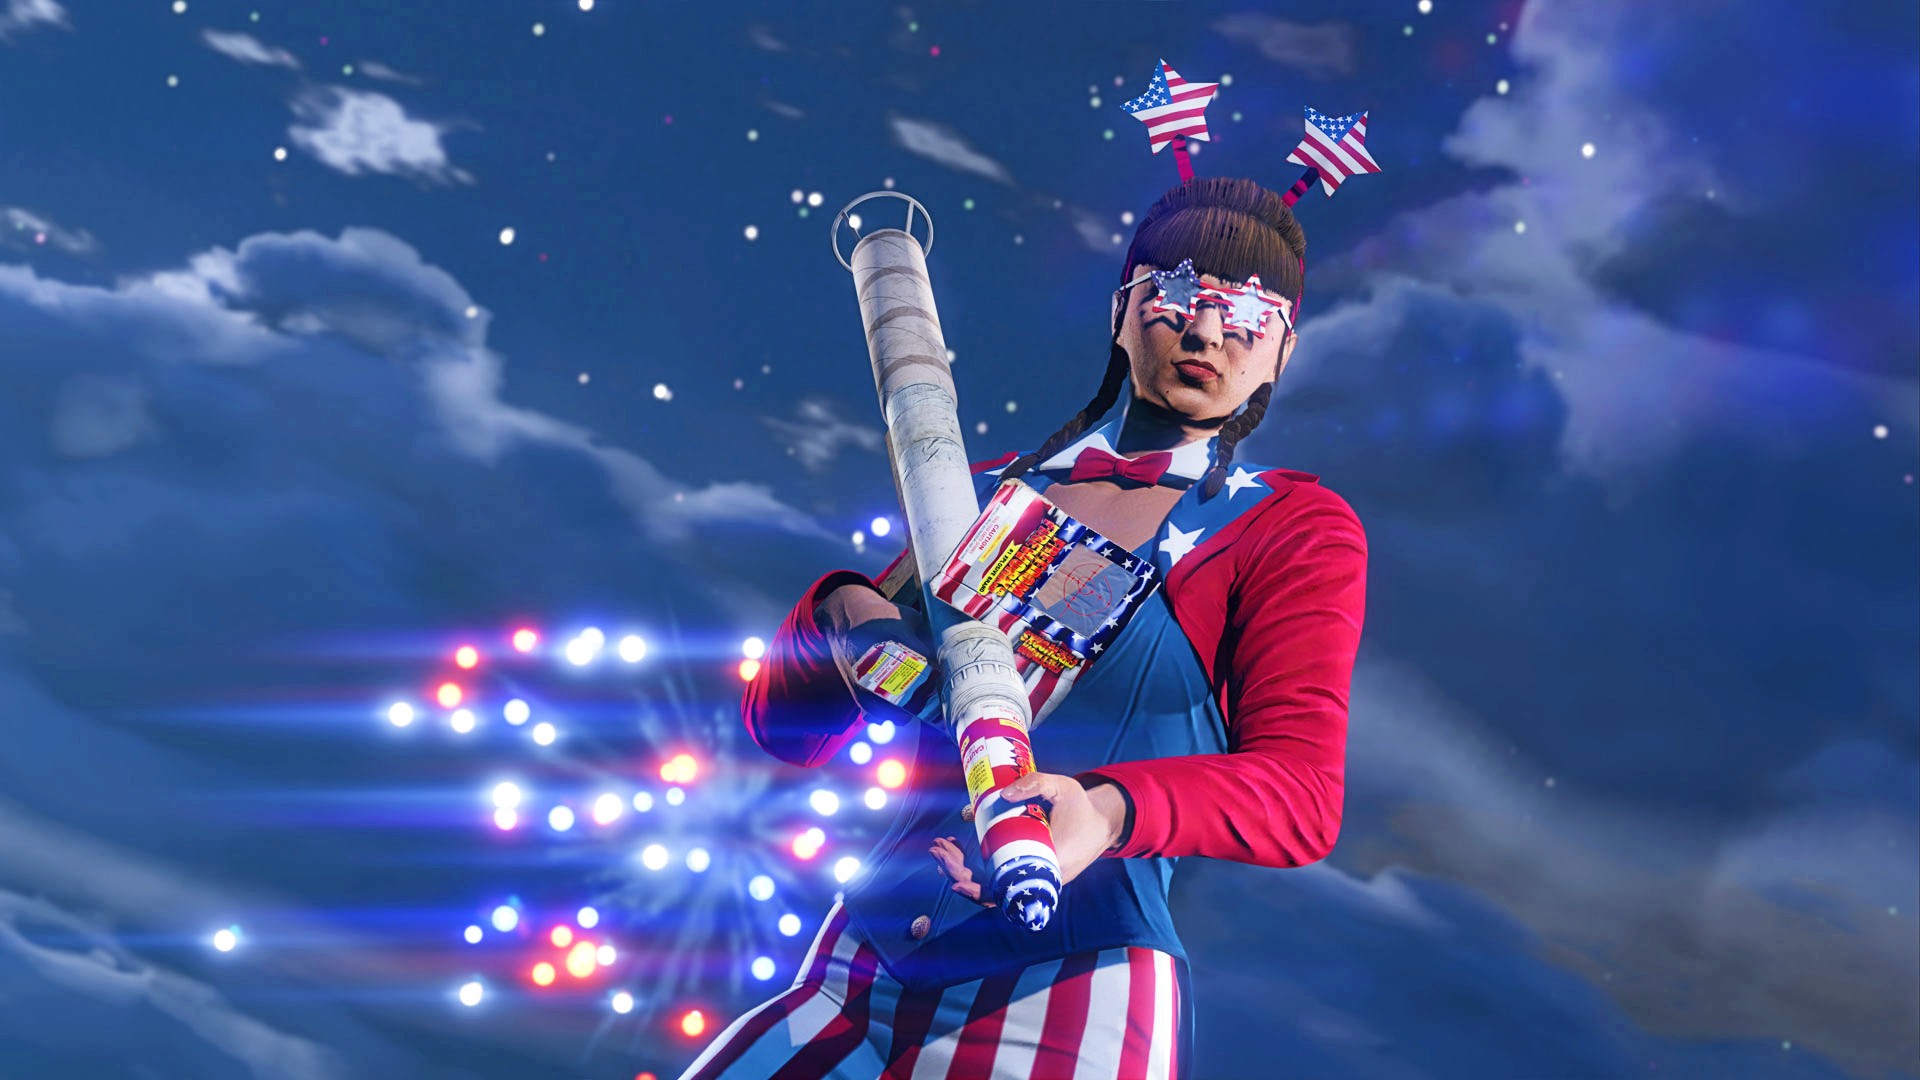 GTA Online’s weekly update contains heaps of Independence Day goodies